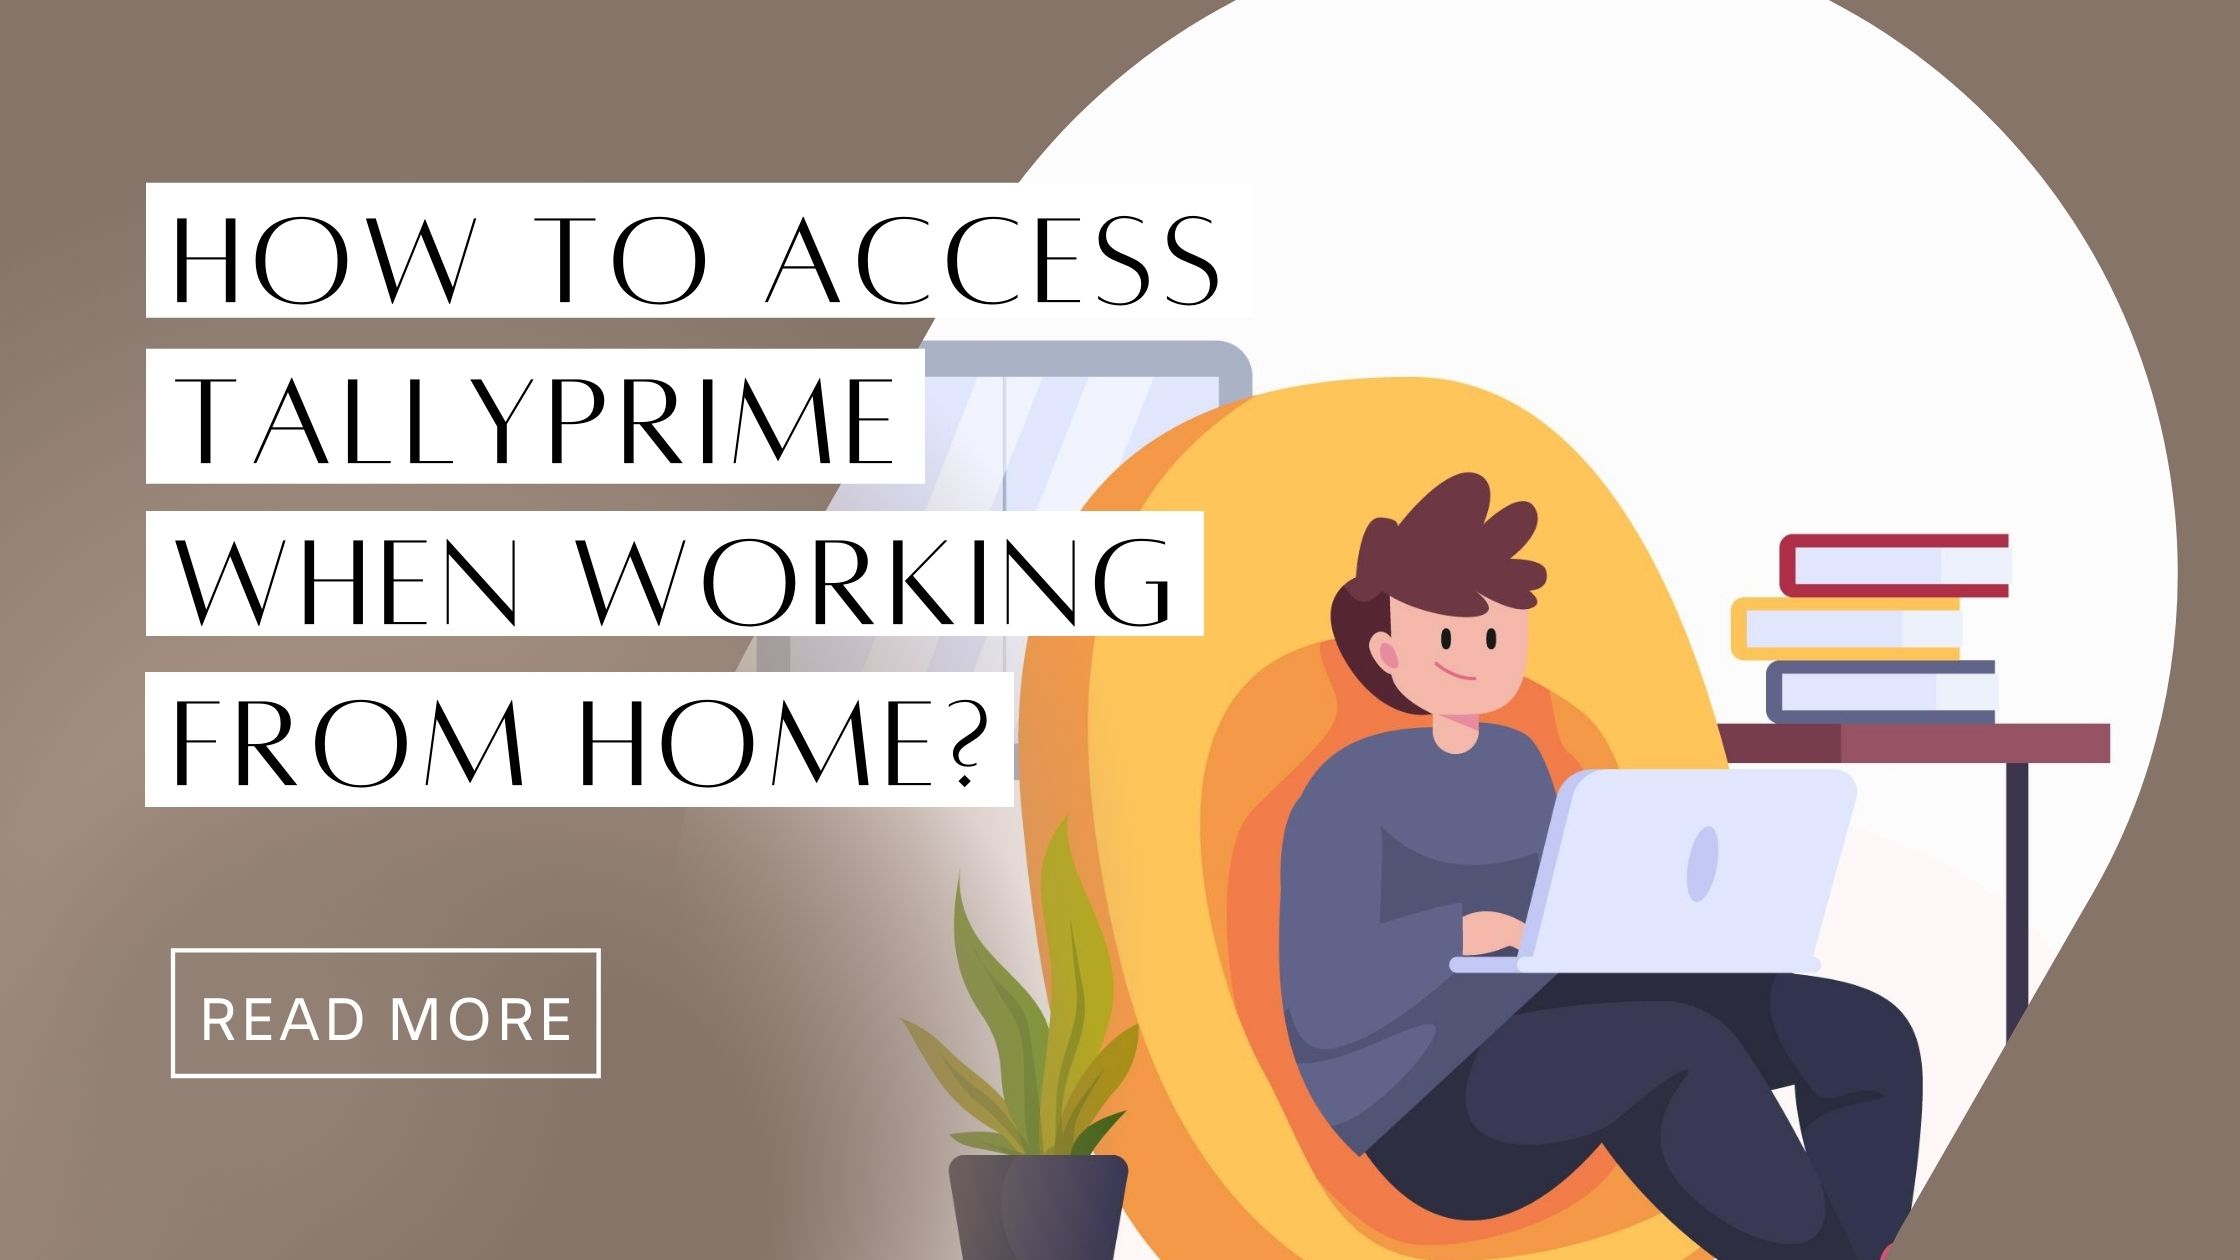 Remote employees securely access TallyPrime for efficient home-based work.